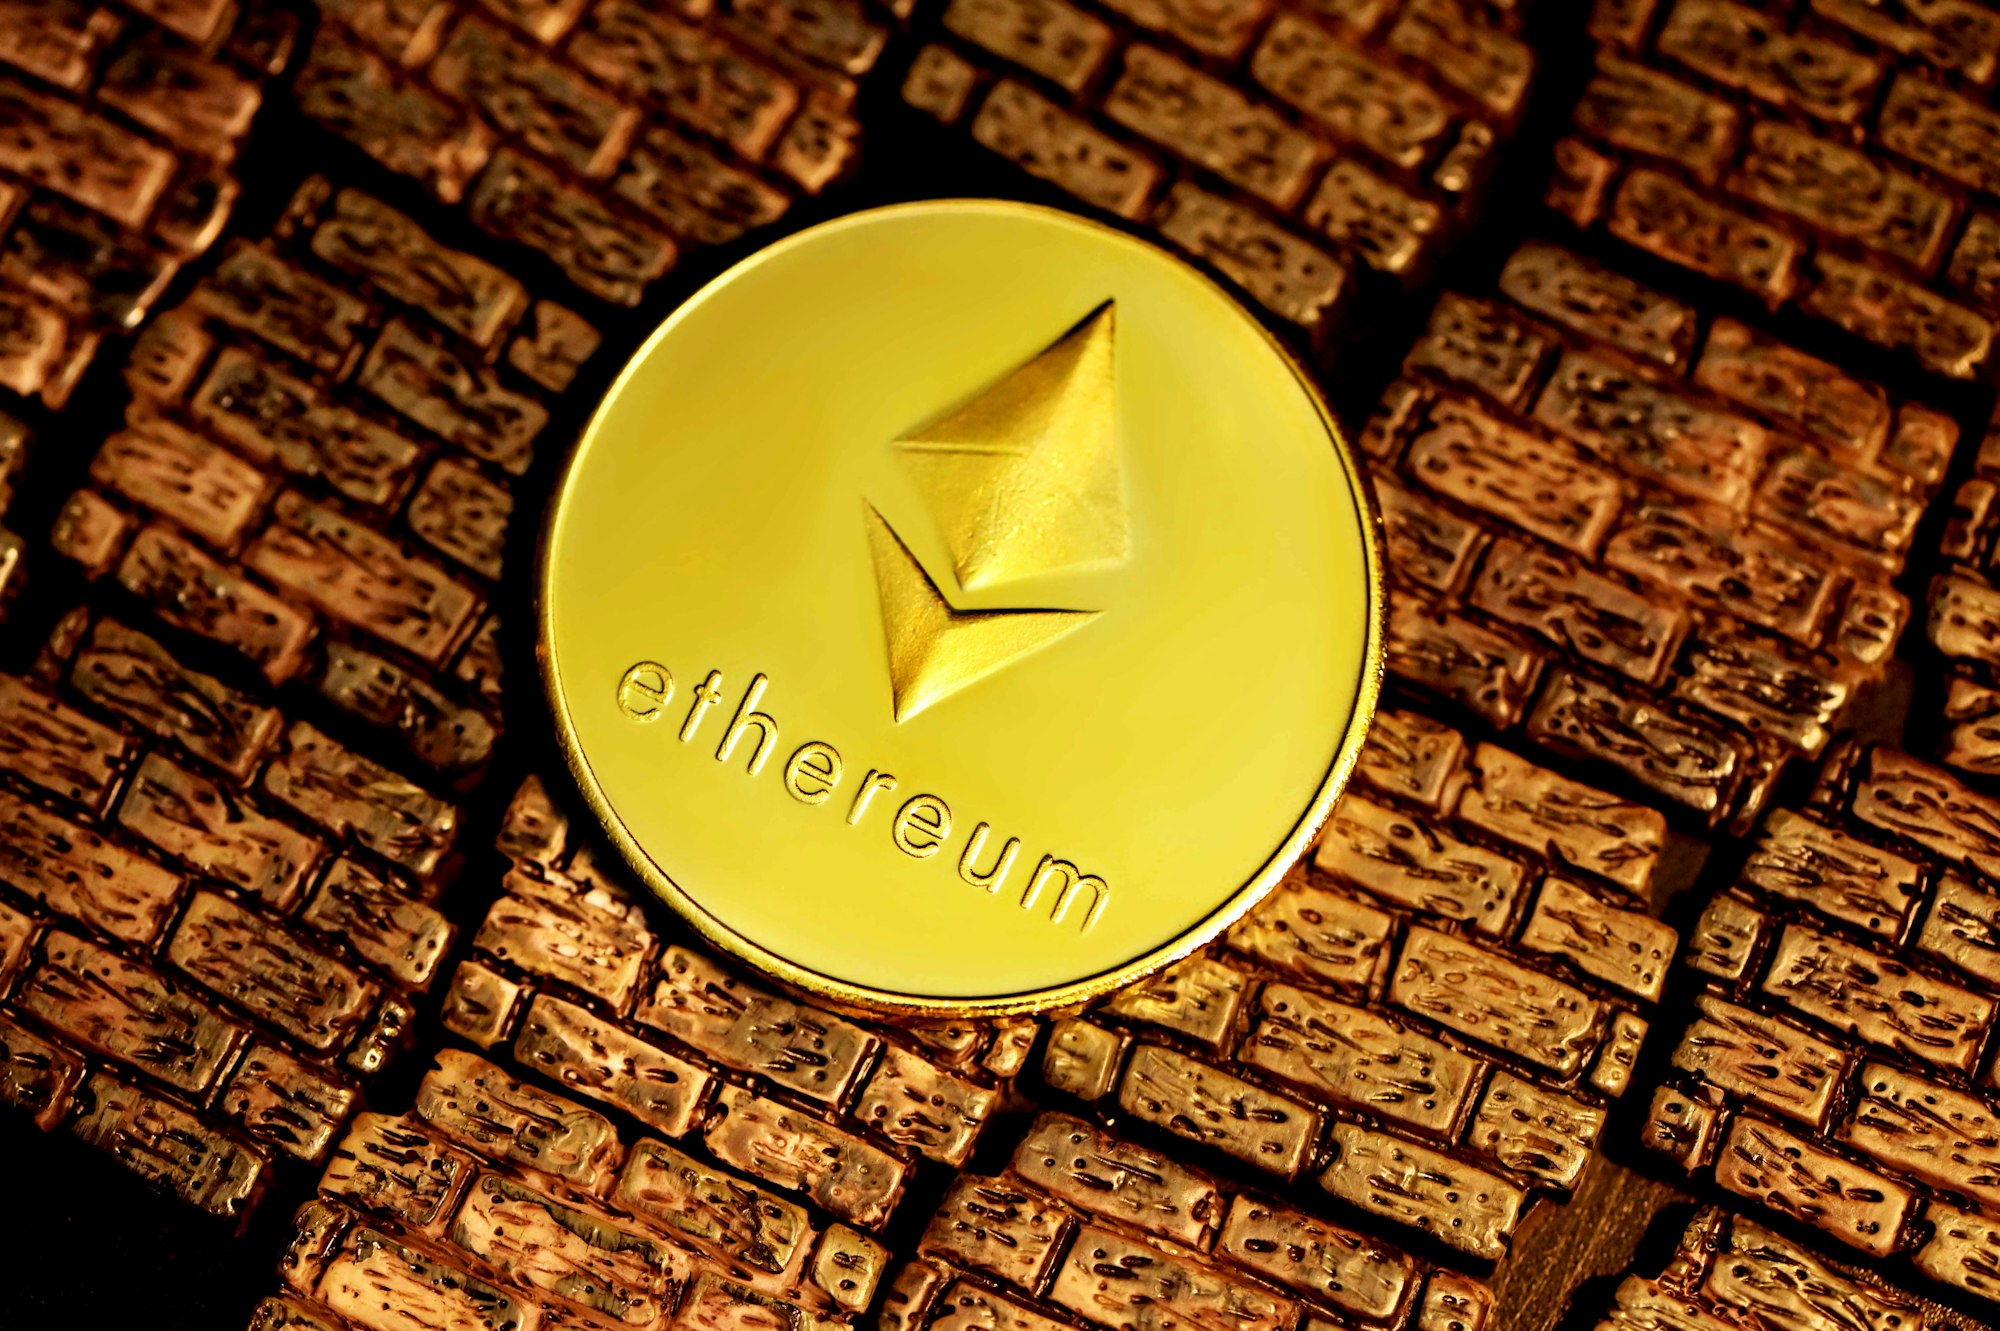 Ethereum coin is on the bricks